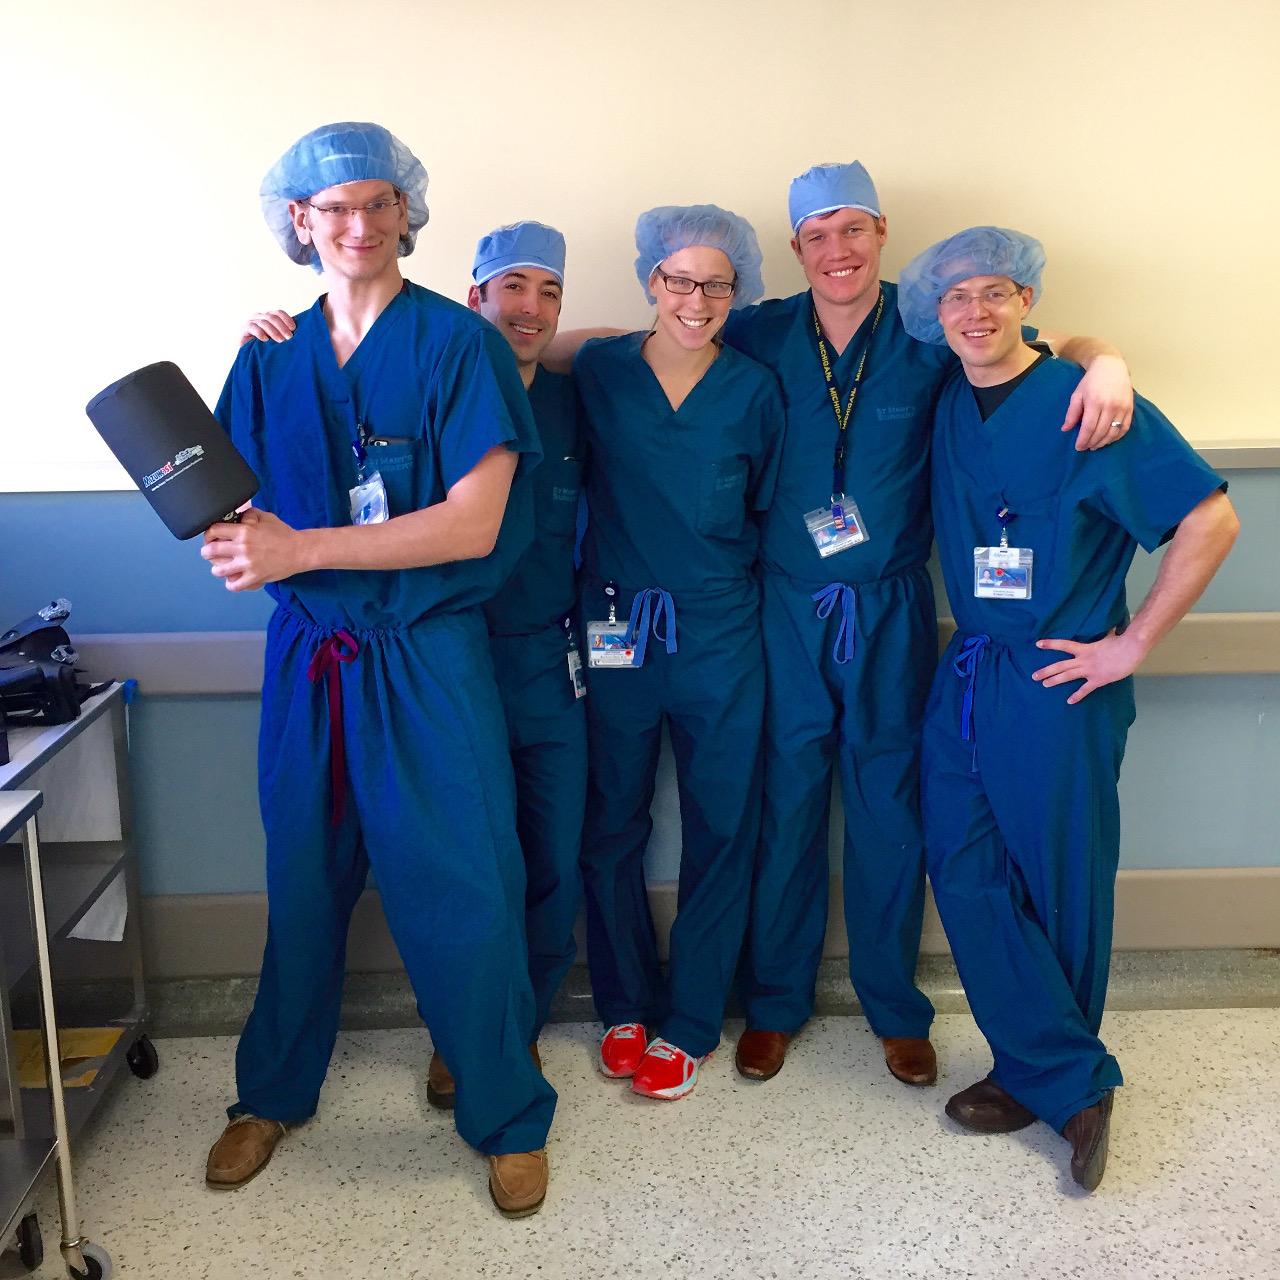 Five orthopedic surgery residents wearing surgical scrubs pose for a picture